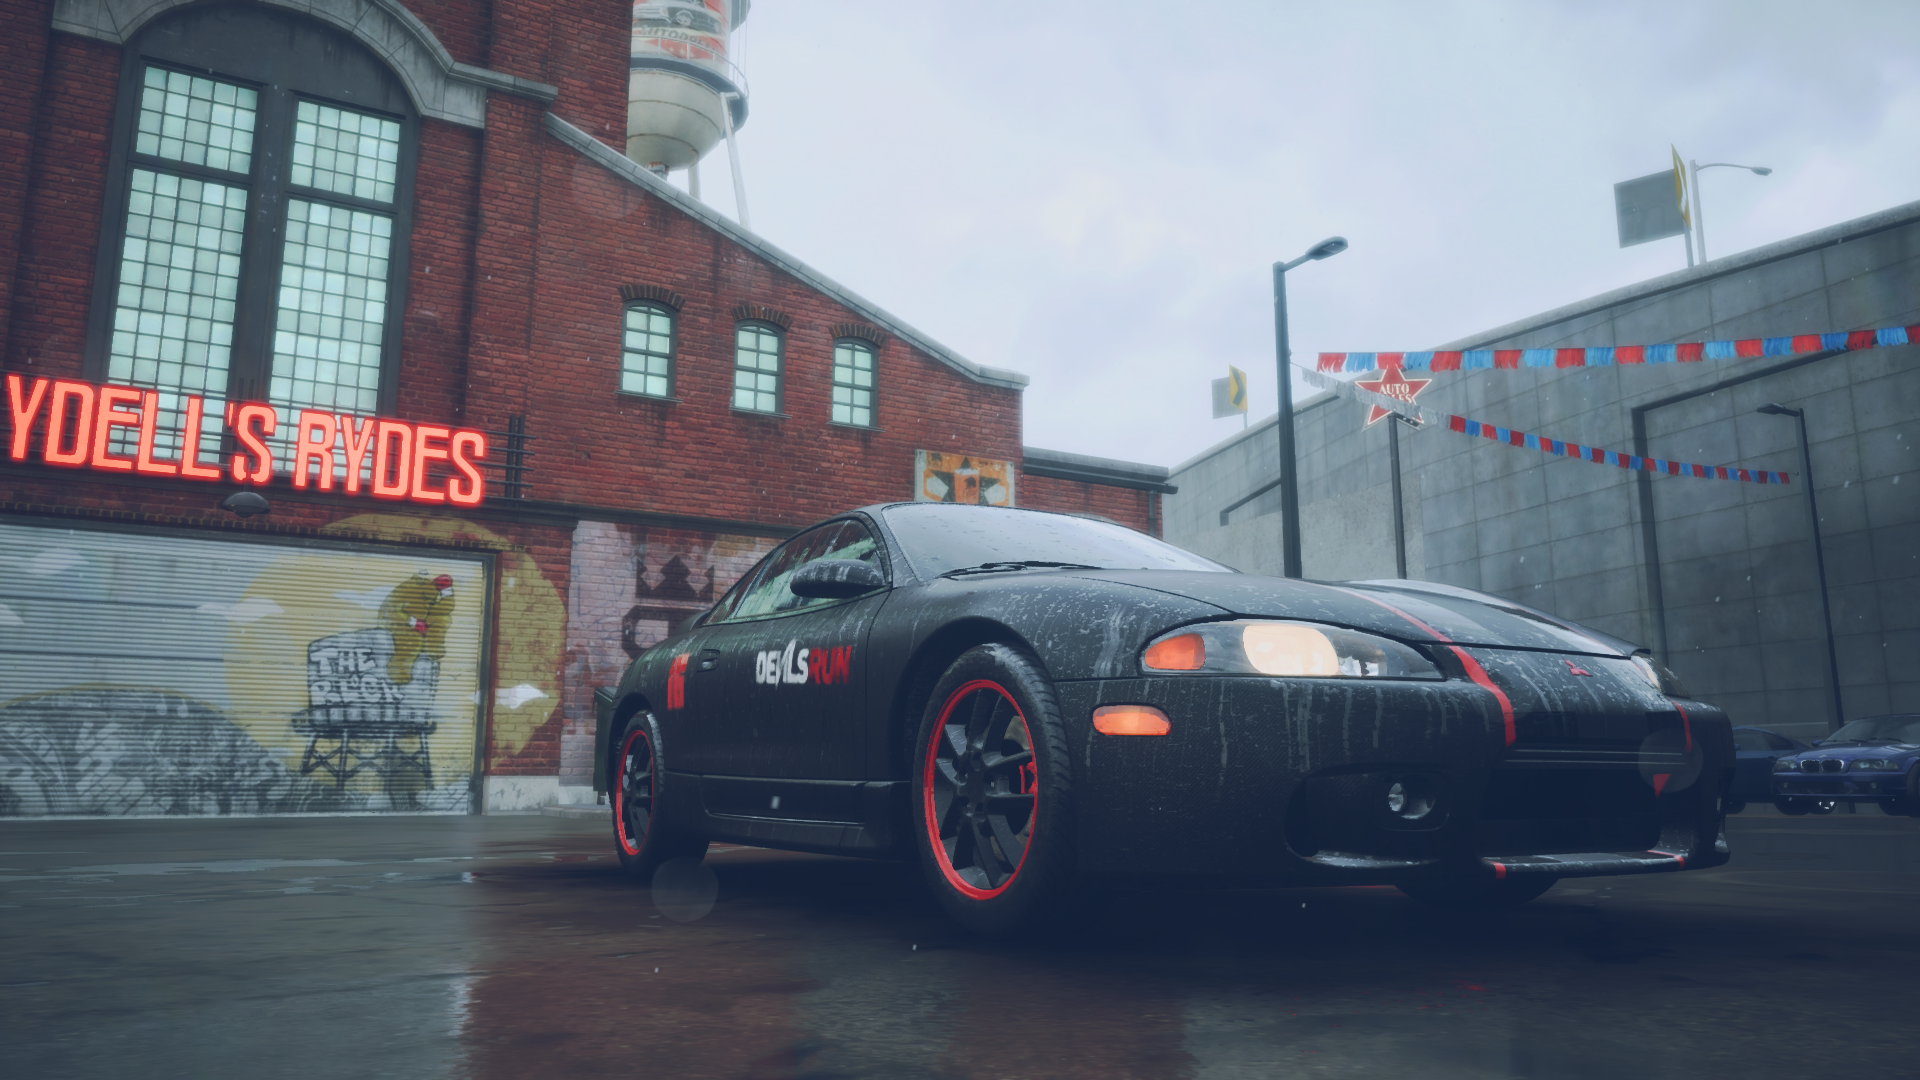 General 1920x1080 Need for Speed Need for speed Unbound video games car CGI frontal view headlights building neon signs